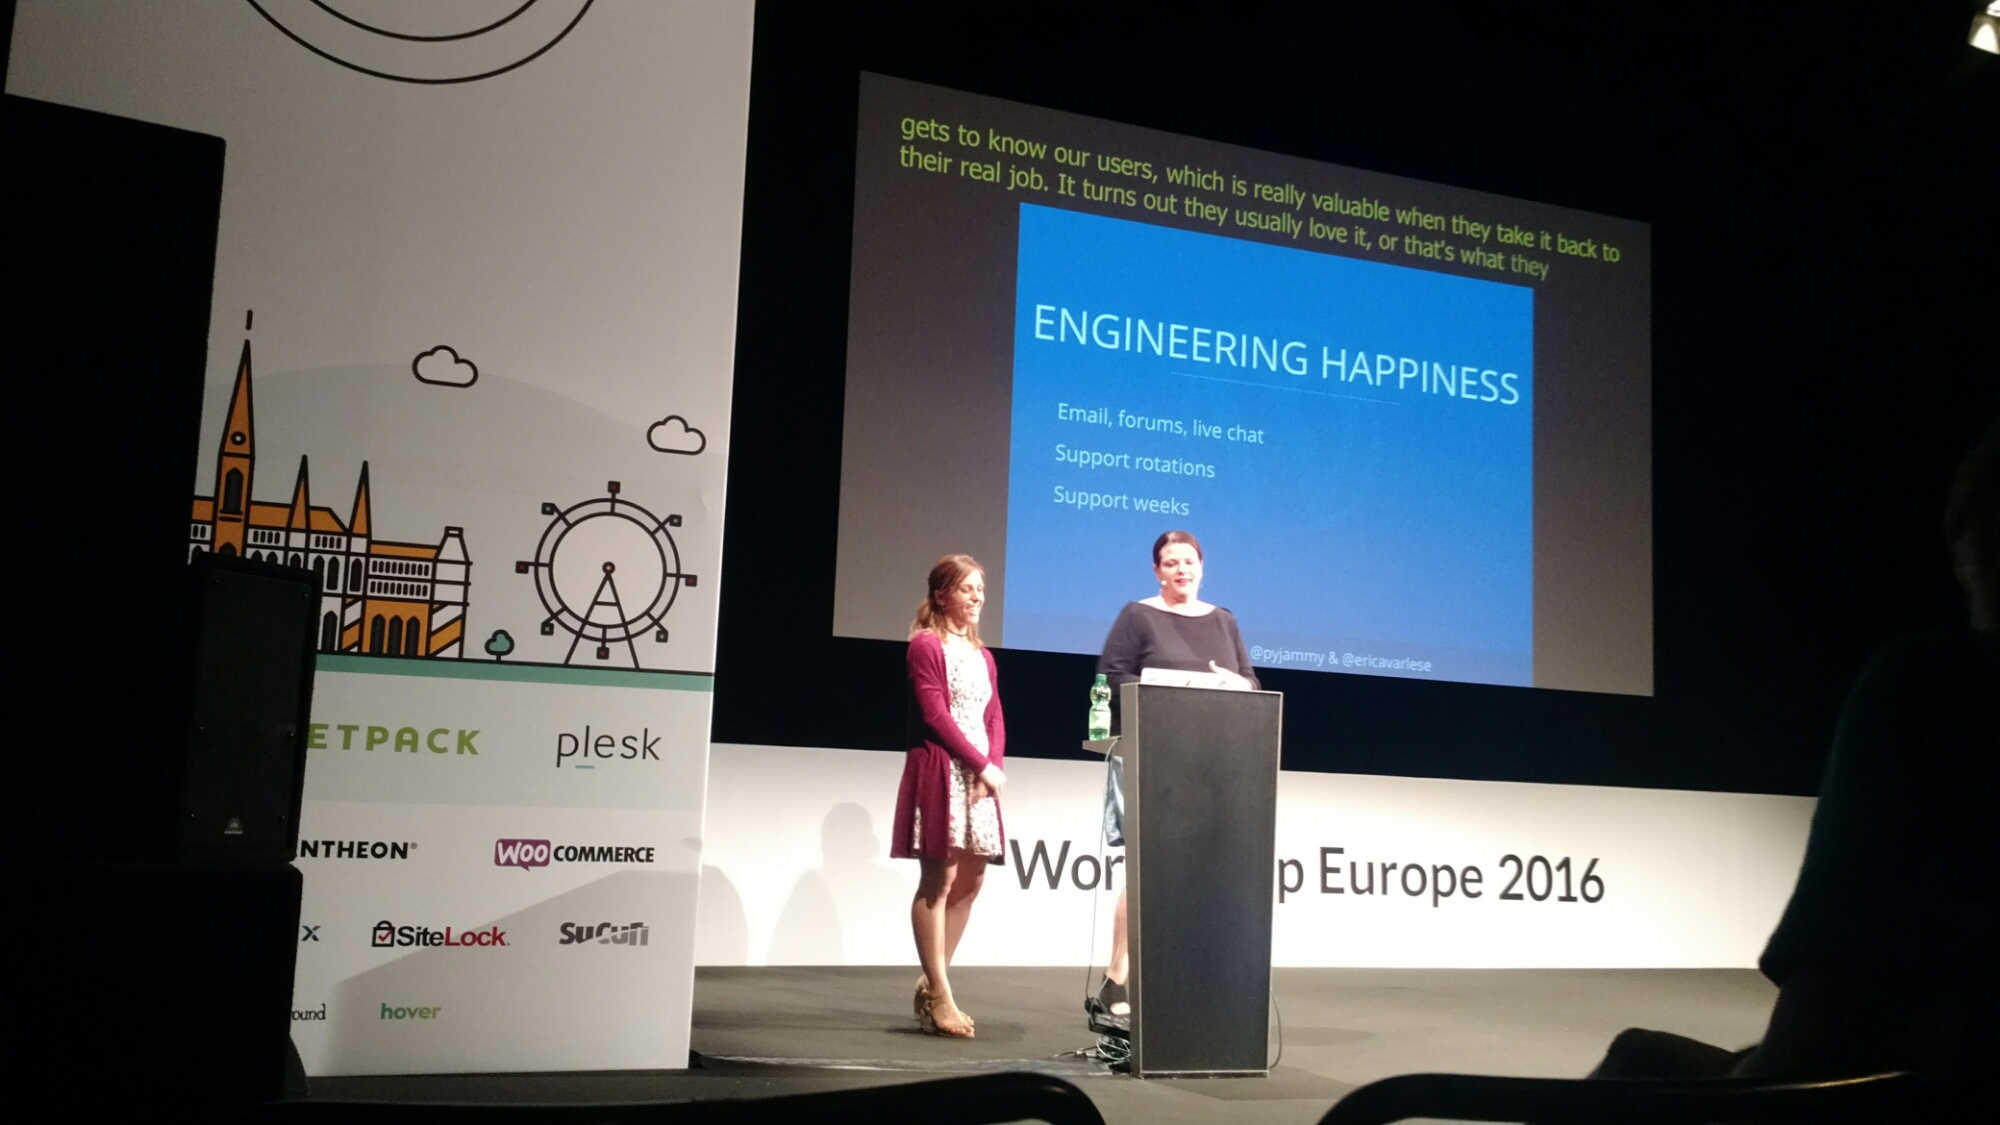 Talk about happiness engineer at Wordcamp Europe 